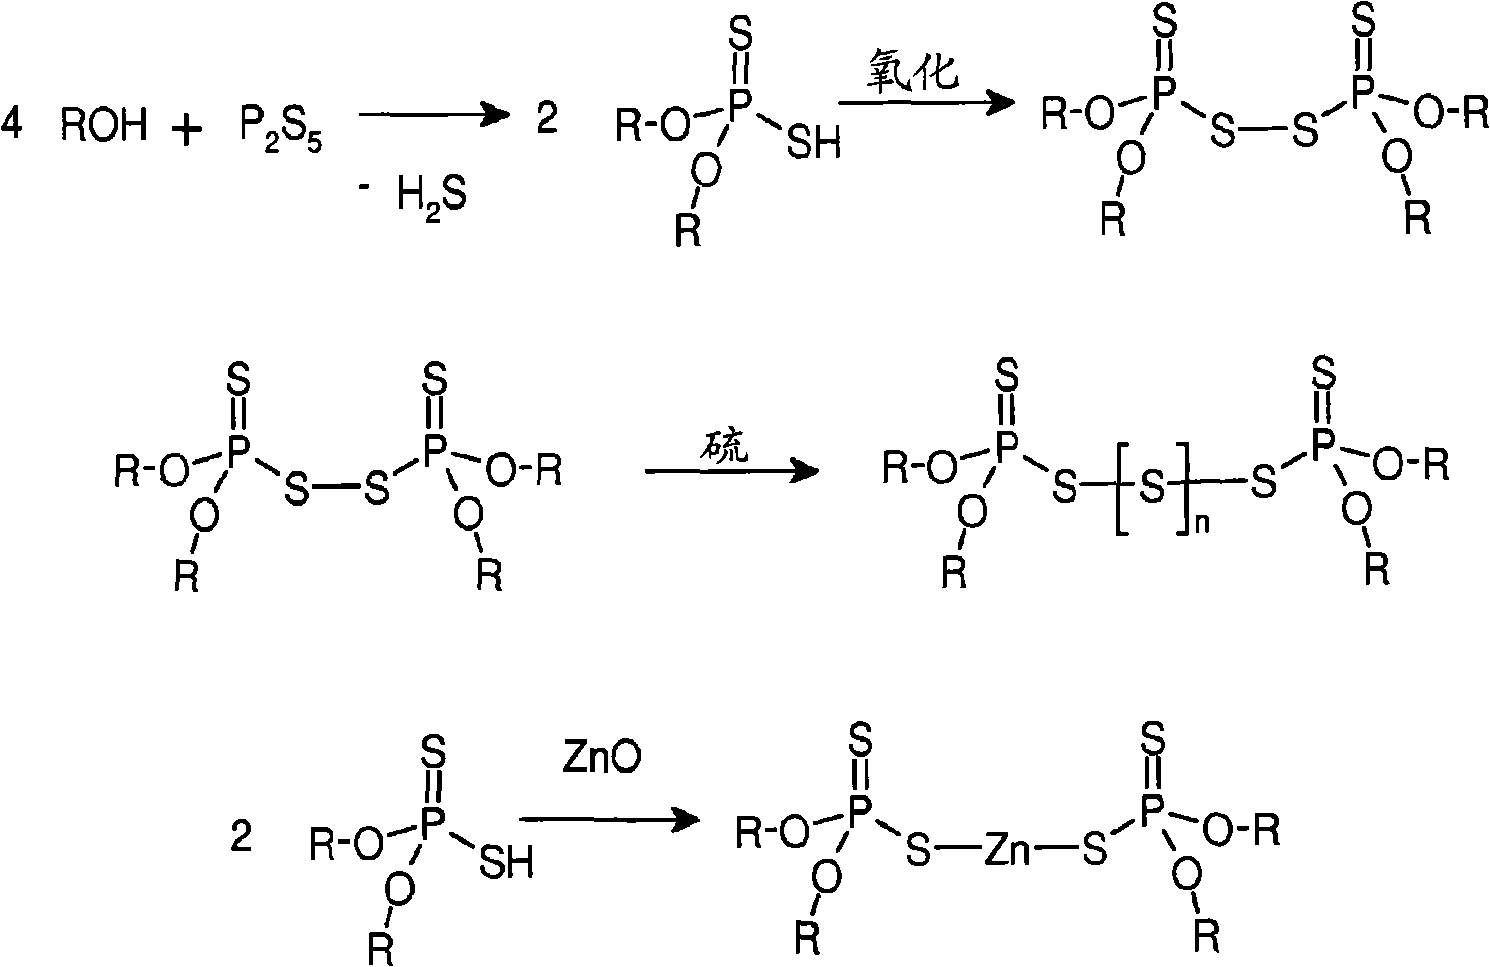 Dithiophosphate composition and utility in rubber